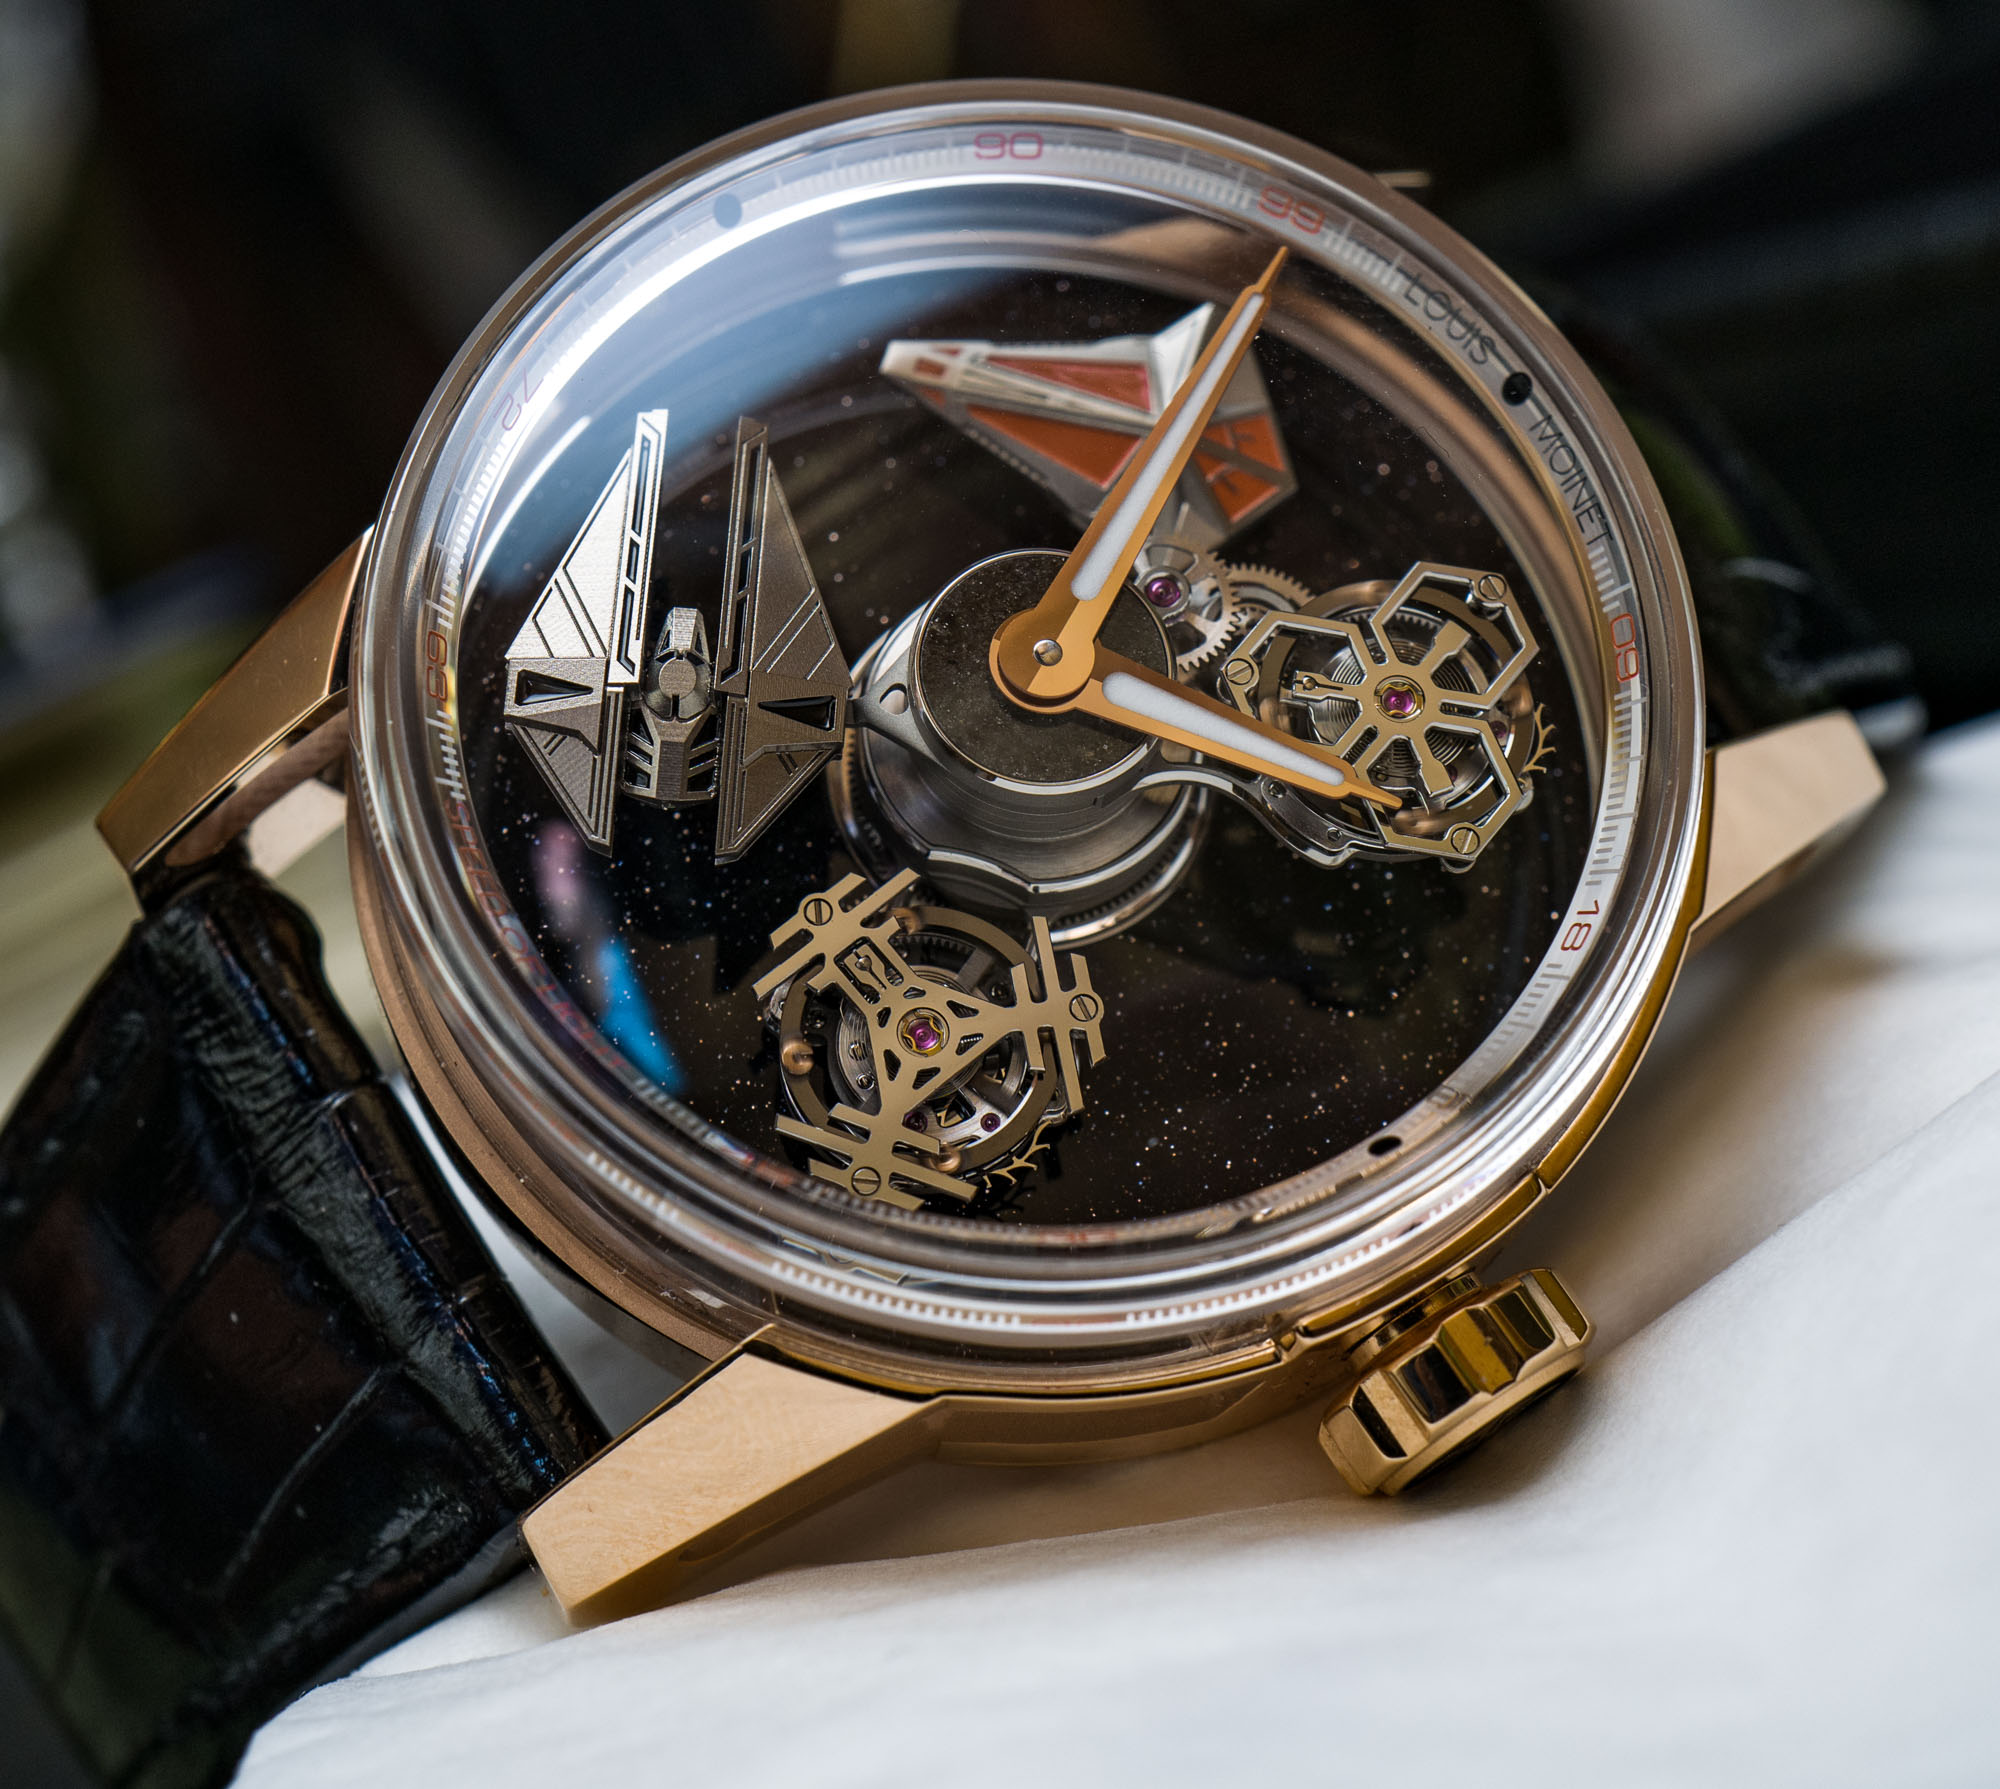 Watch Review:Louis Moinet Space Mystery